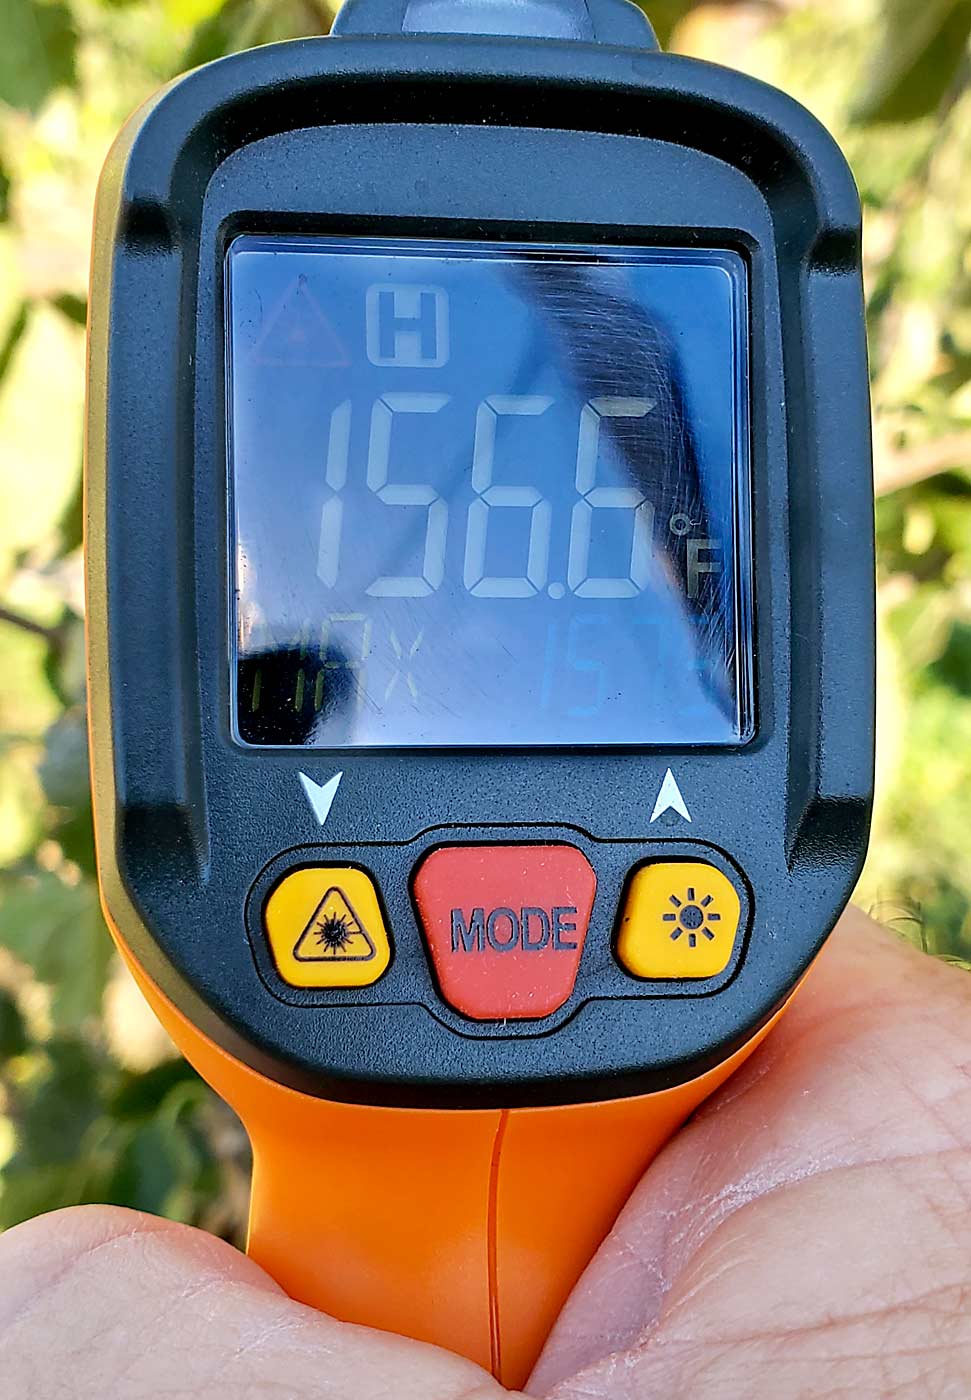 Horticulturist Byron Phillips measures a fruit surface temperature of 156.6 degrees Fahrenheit in an unprotected Honeycrisp block near Quincy, Washington, on June 29, when the ambient air temperature was around 110 degrees. Sunburn browning can occur when fruit surfaces exceed 114 degrees, and sunburn necrosis above 120. (Courtesy Byron Phillips)